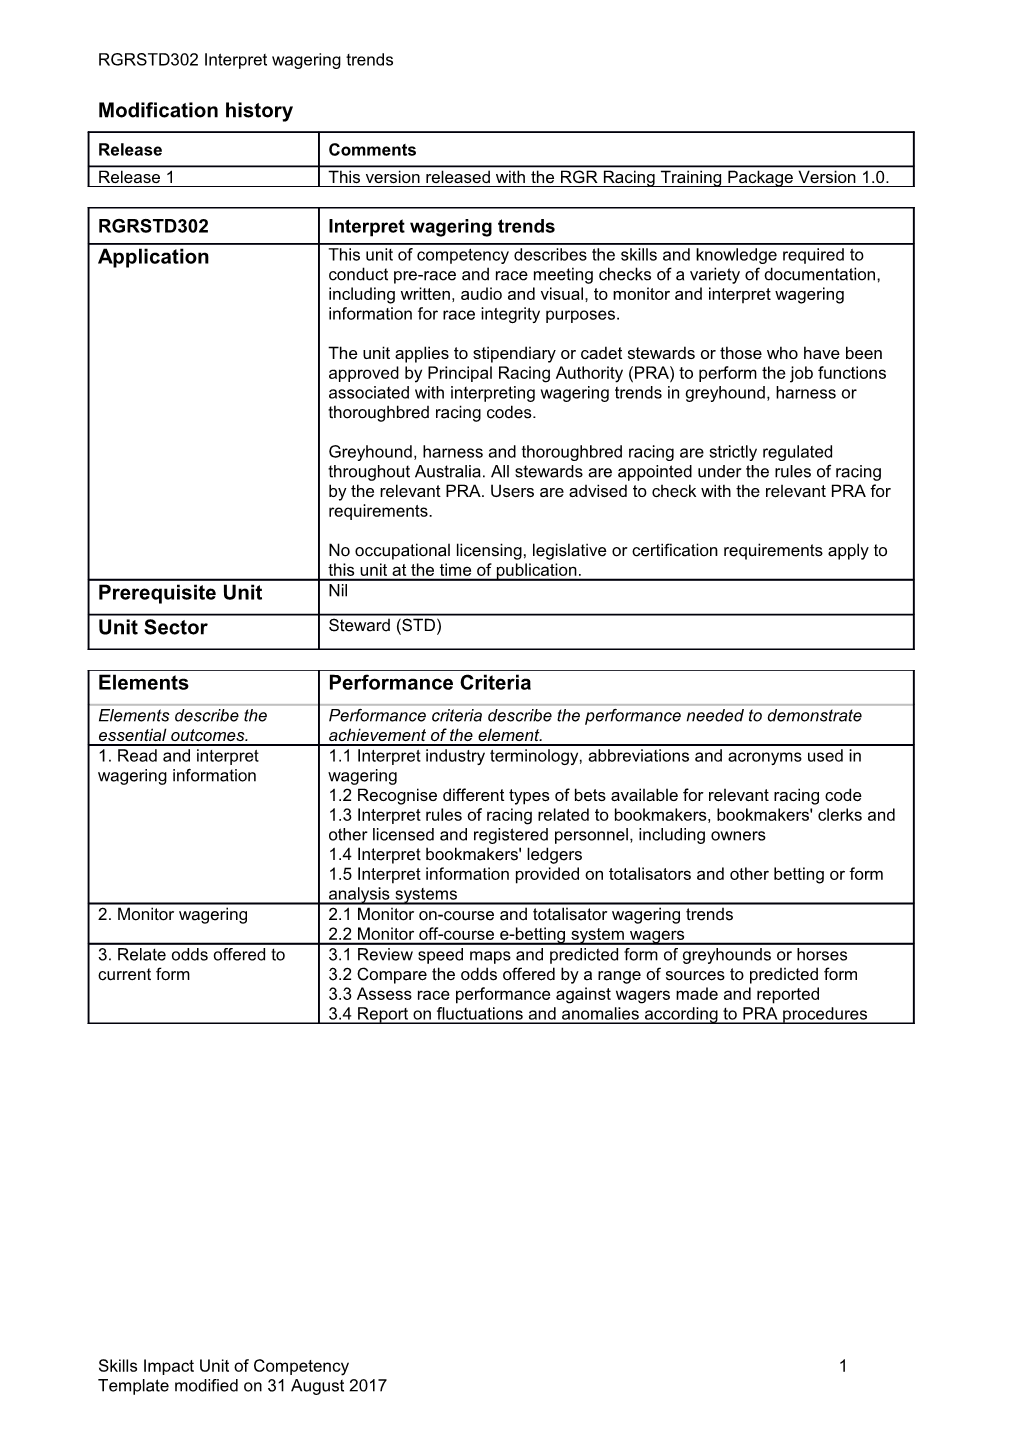 Skills Impact Unit of Competency Template s3